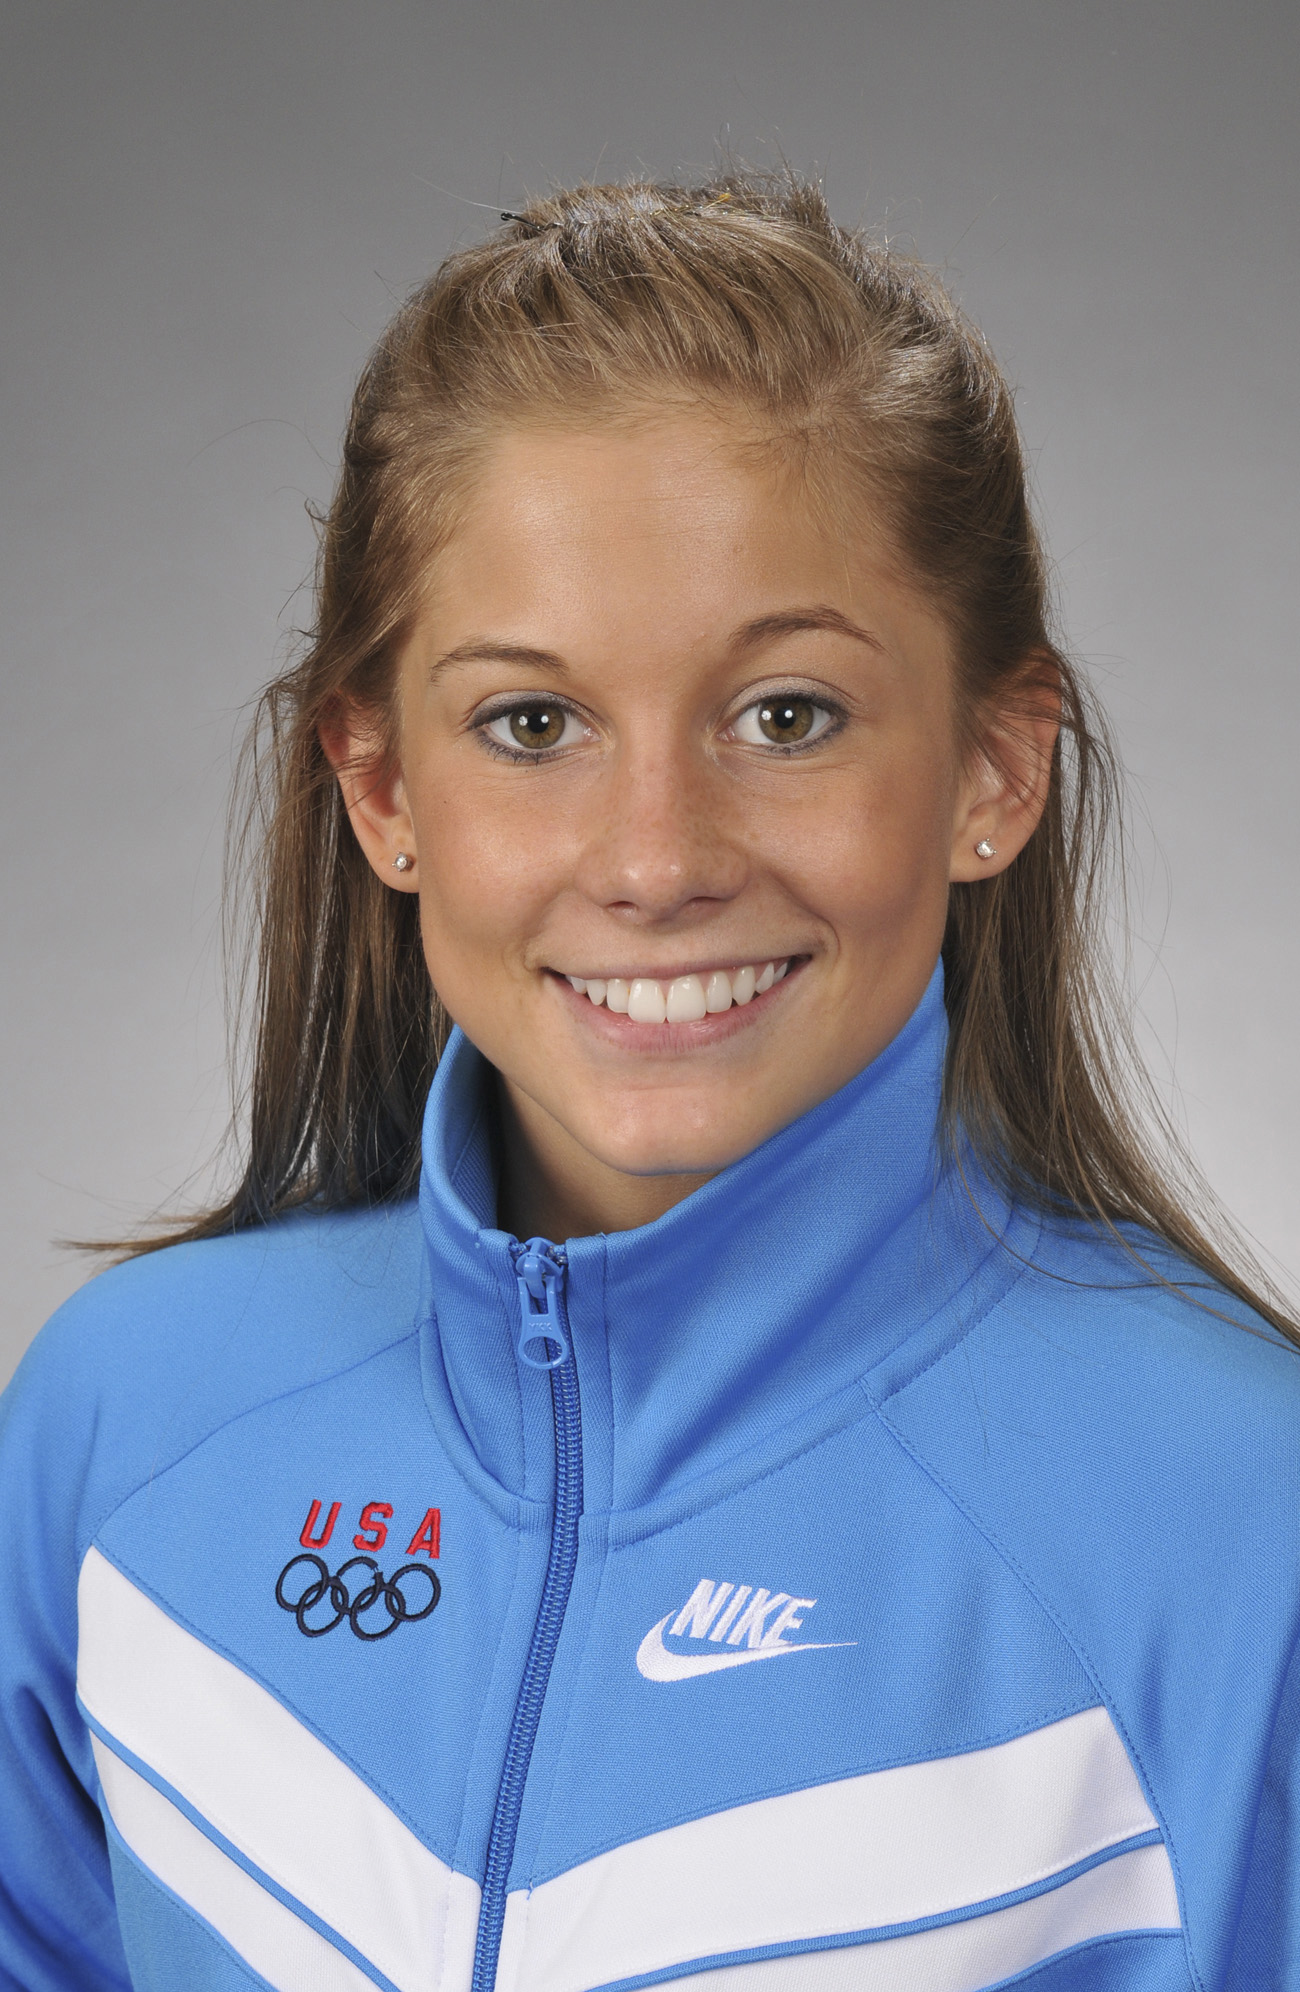 Shawn Johnson is a member of the 2008 U.S. Olympic Womens Gymnastics team. | Source: Getty Images